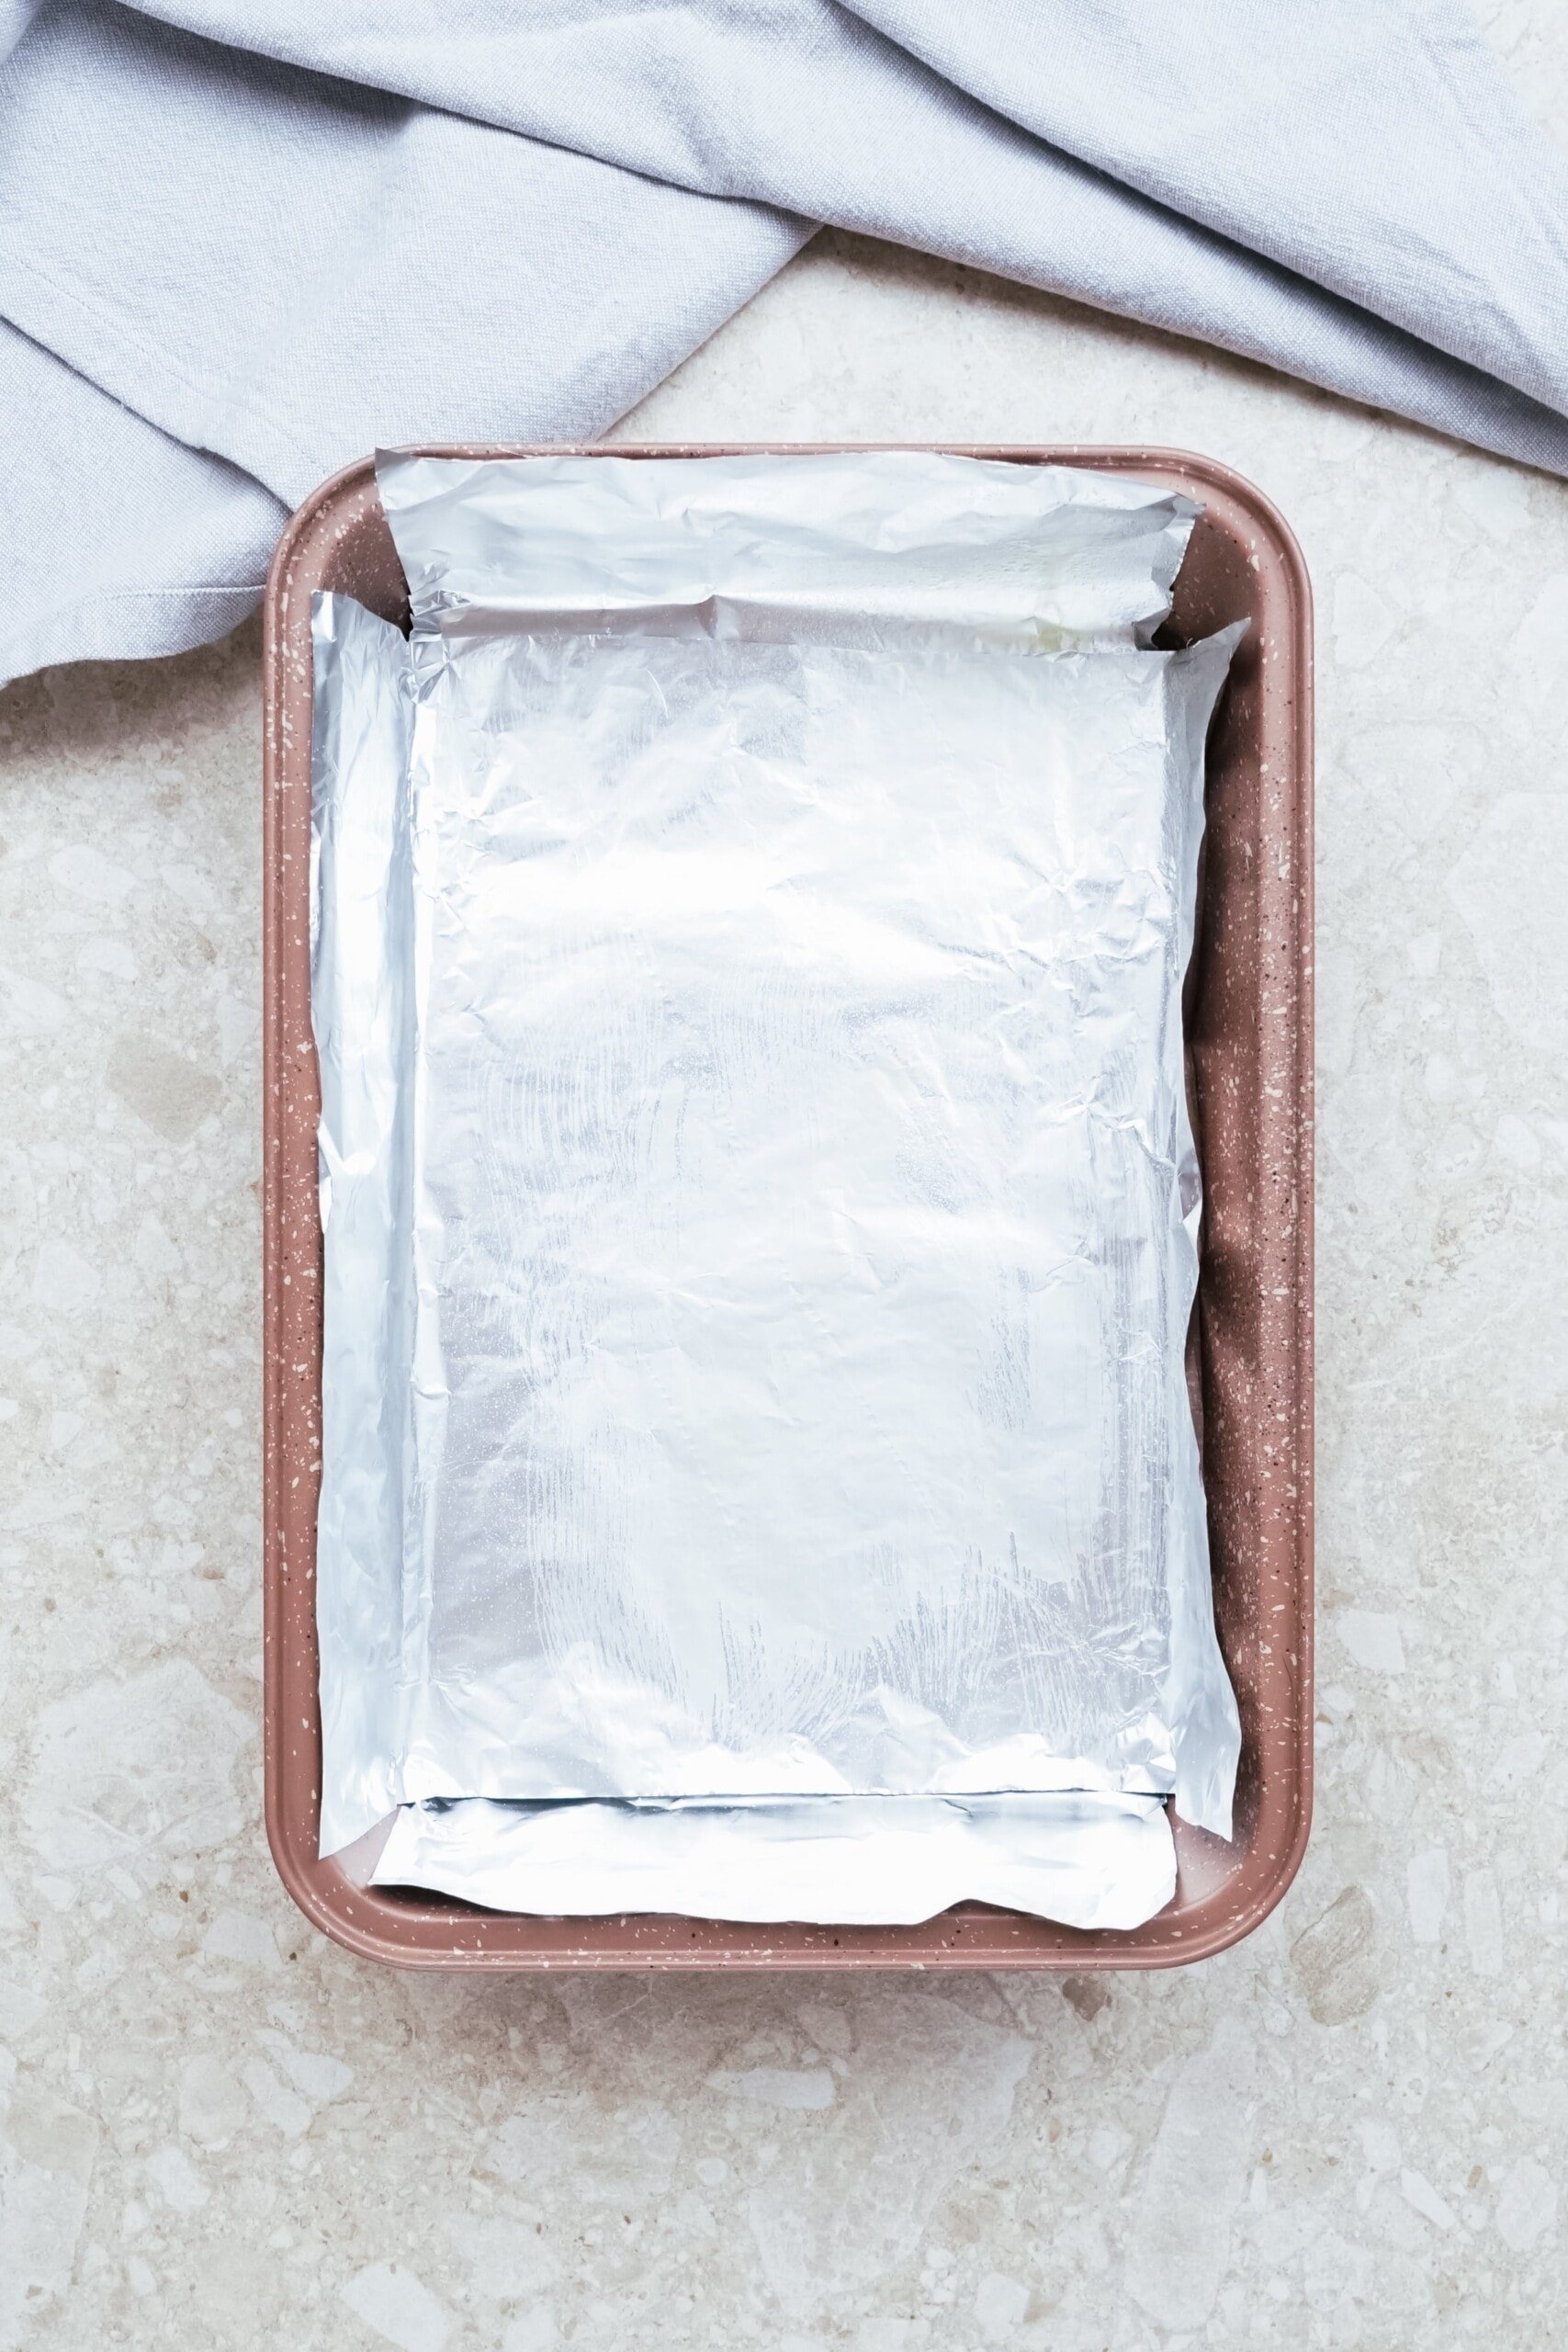 pan lined with foil